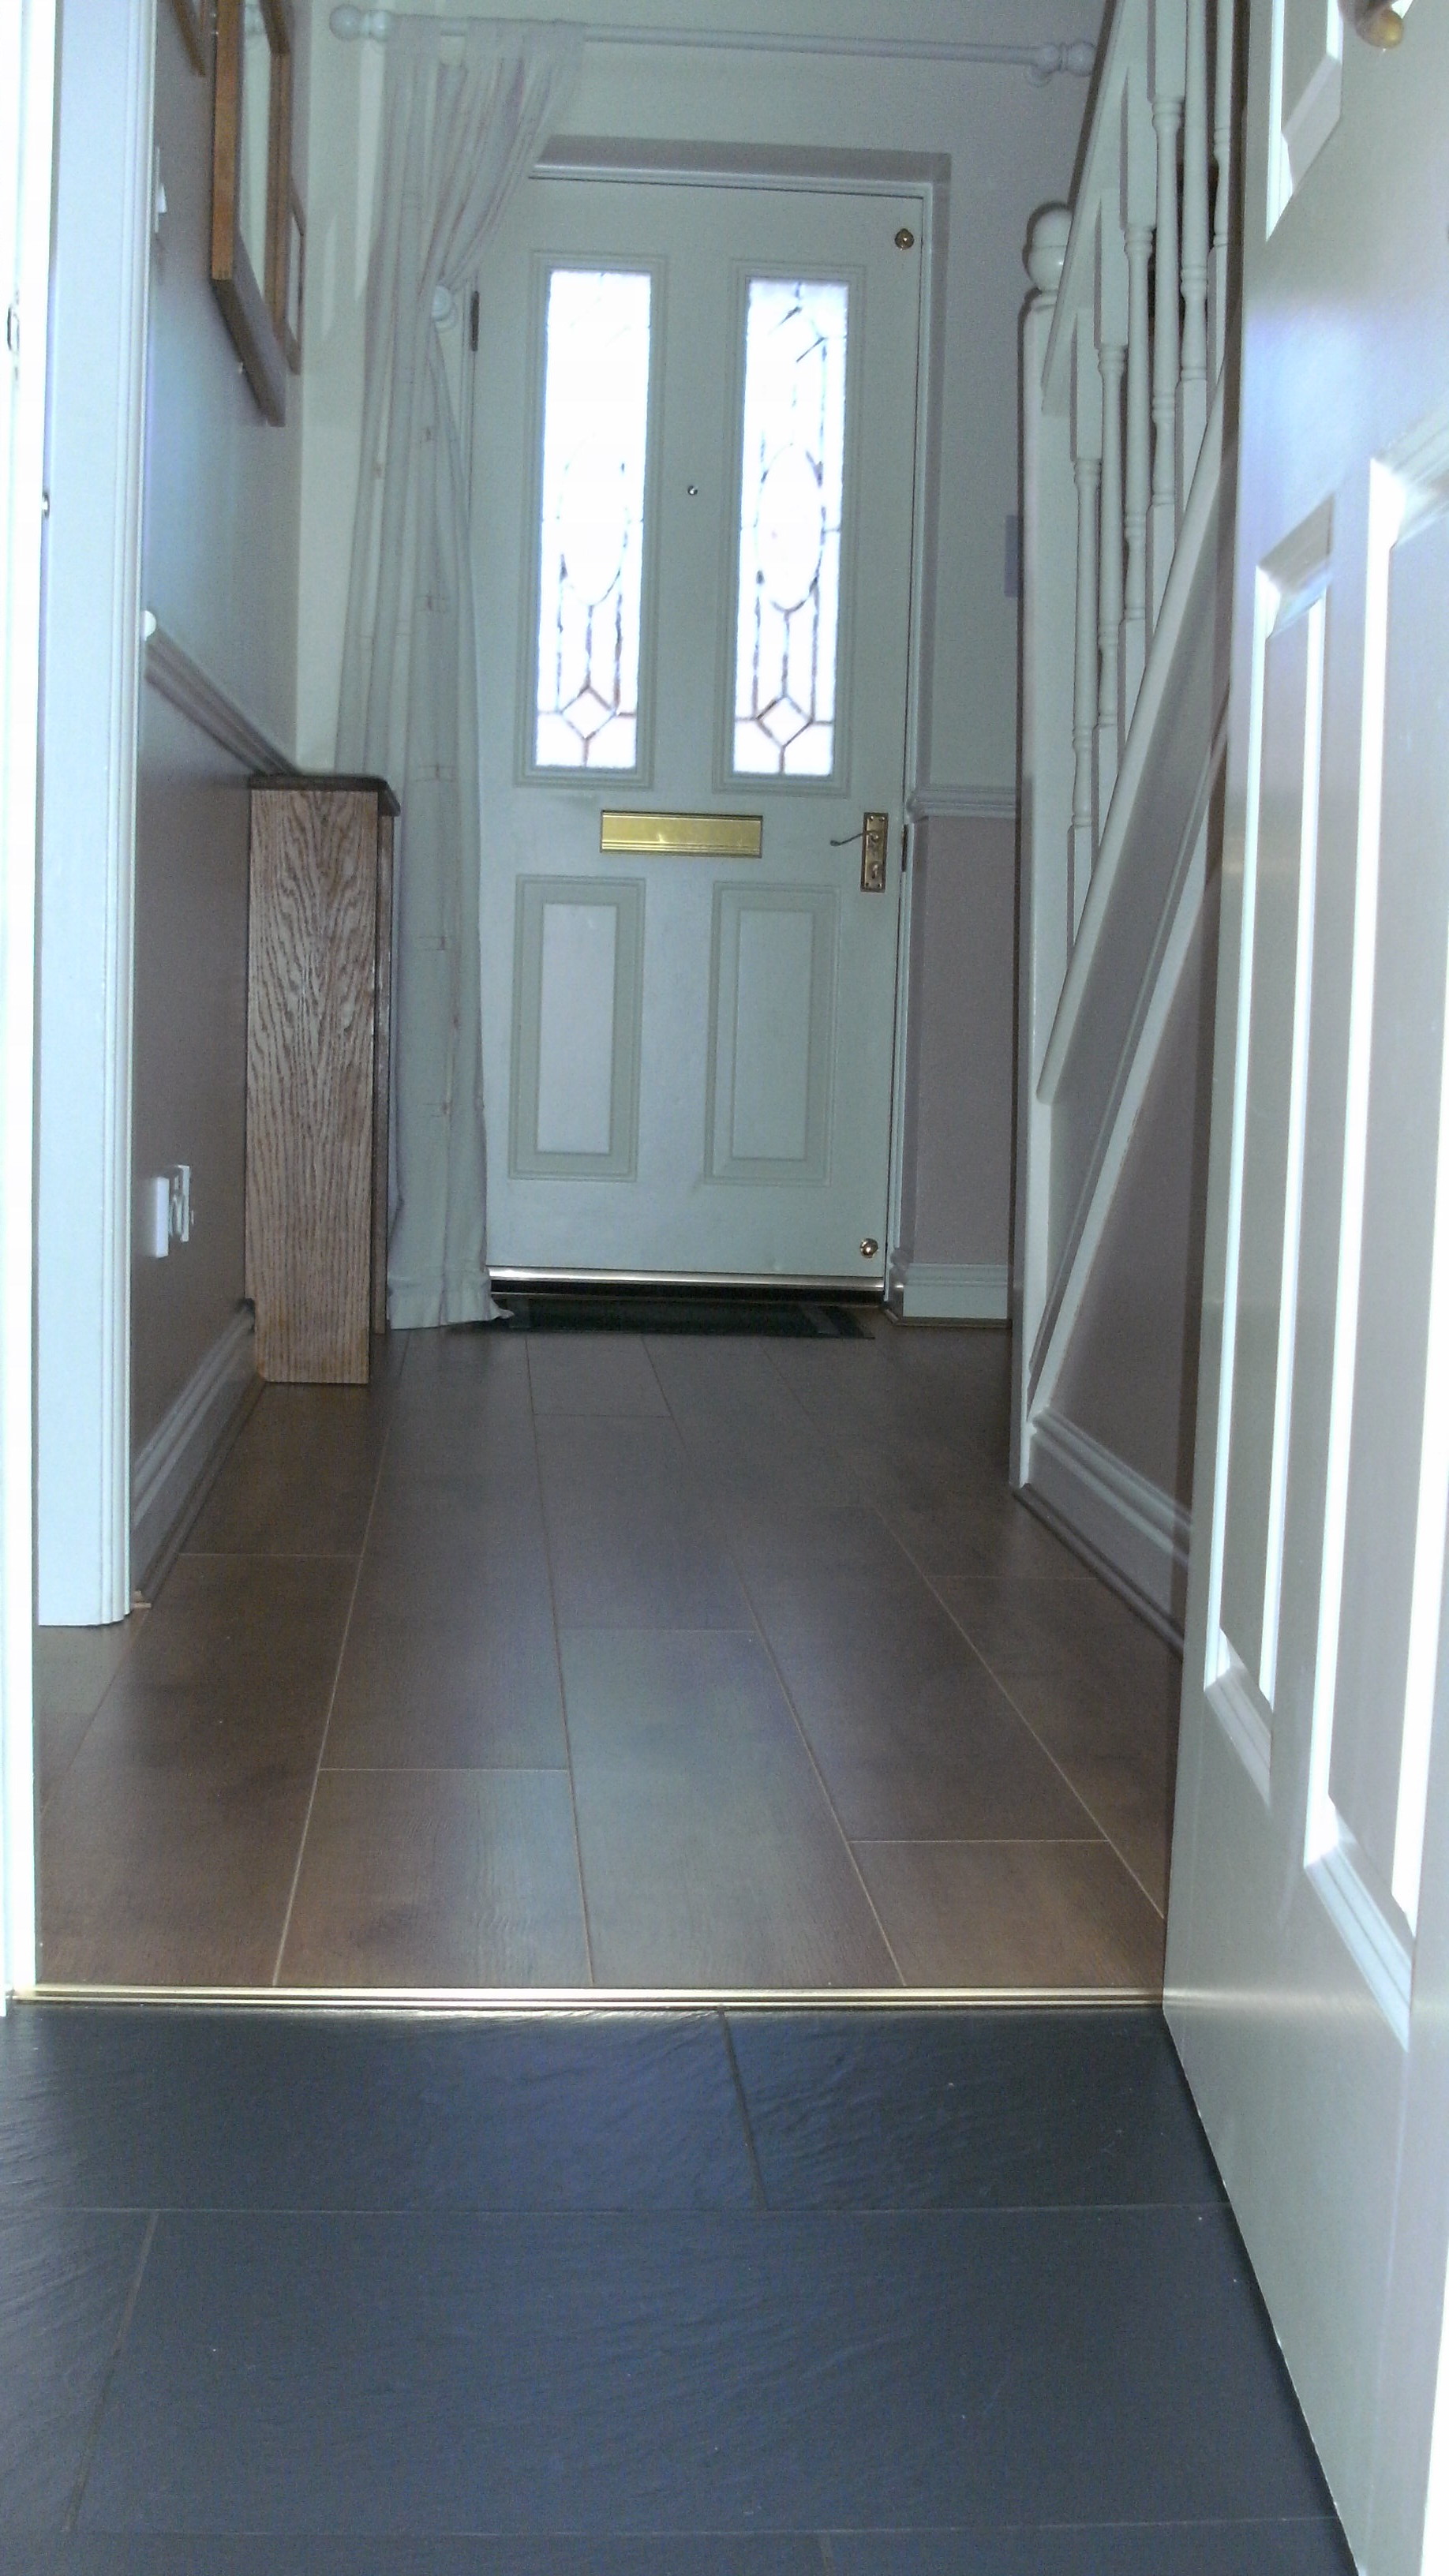 Laminate and tiled floor